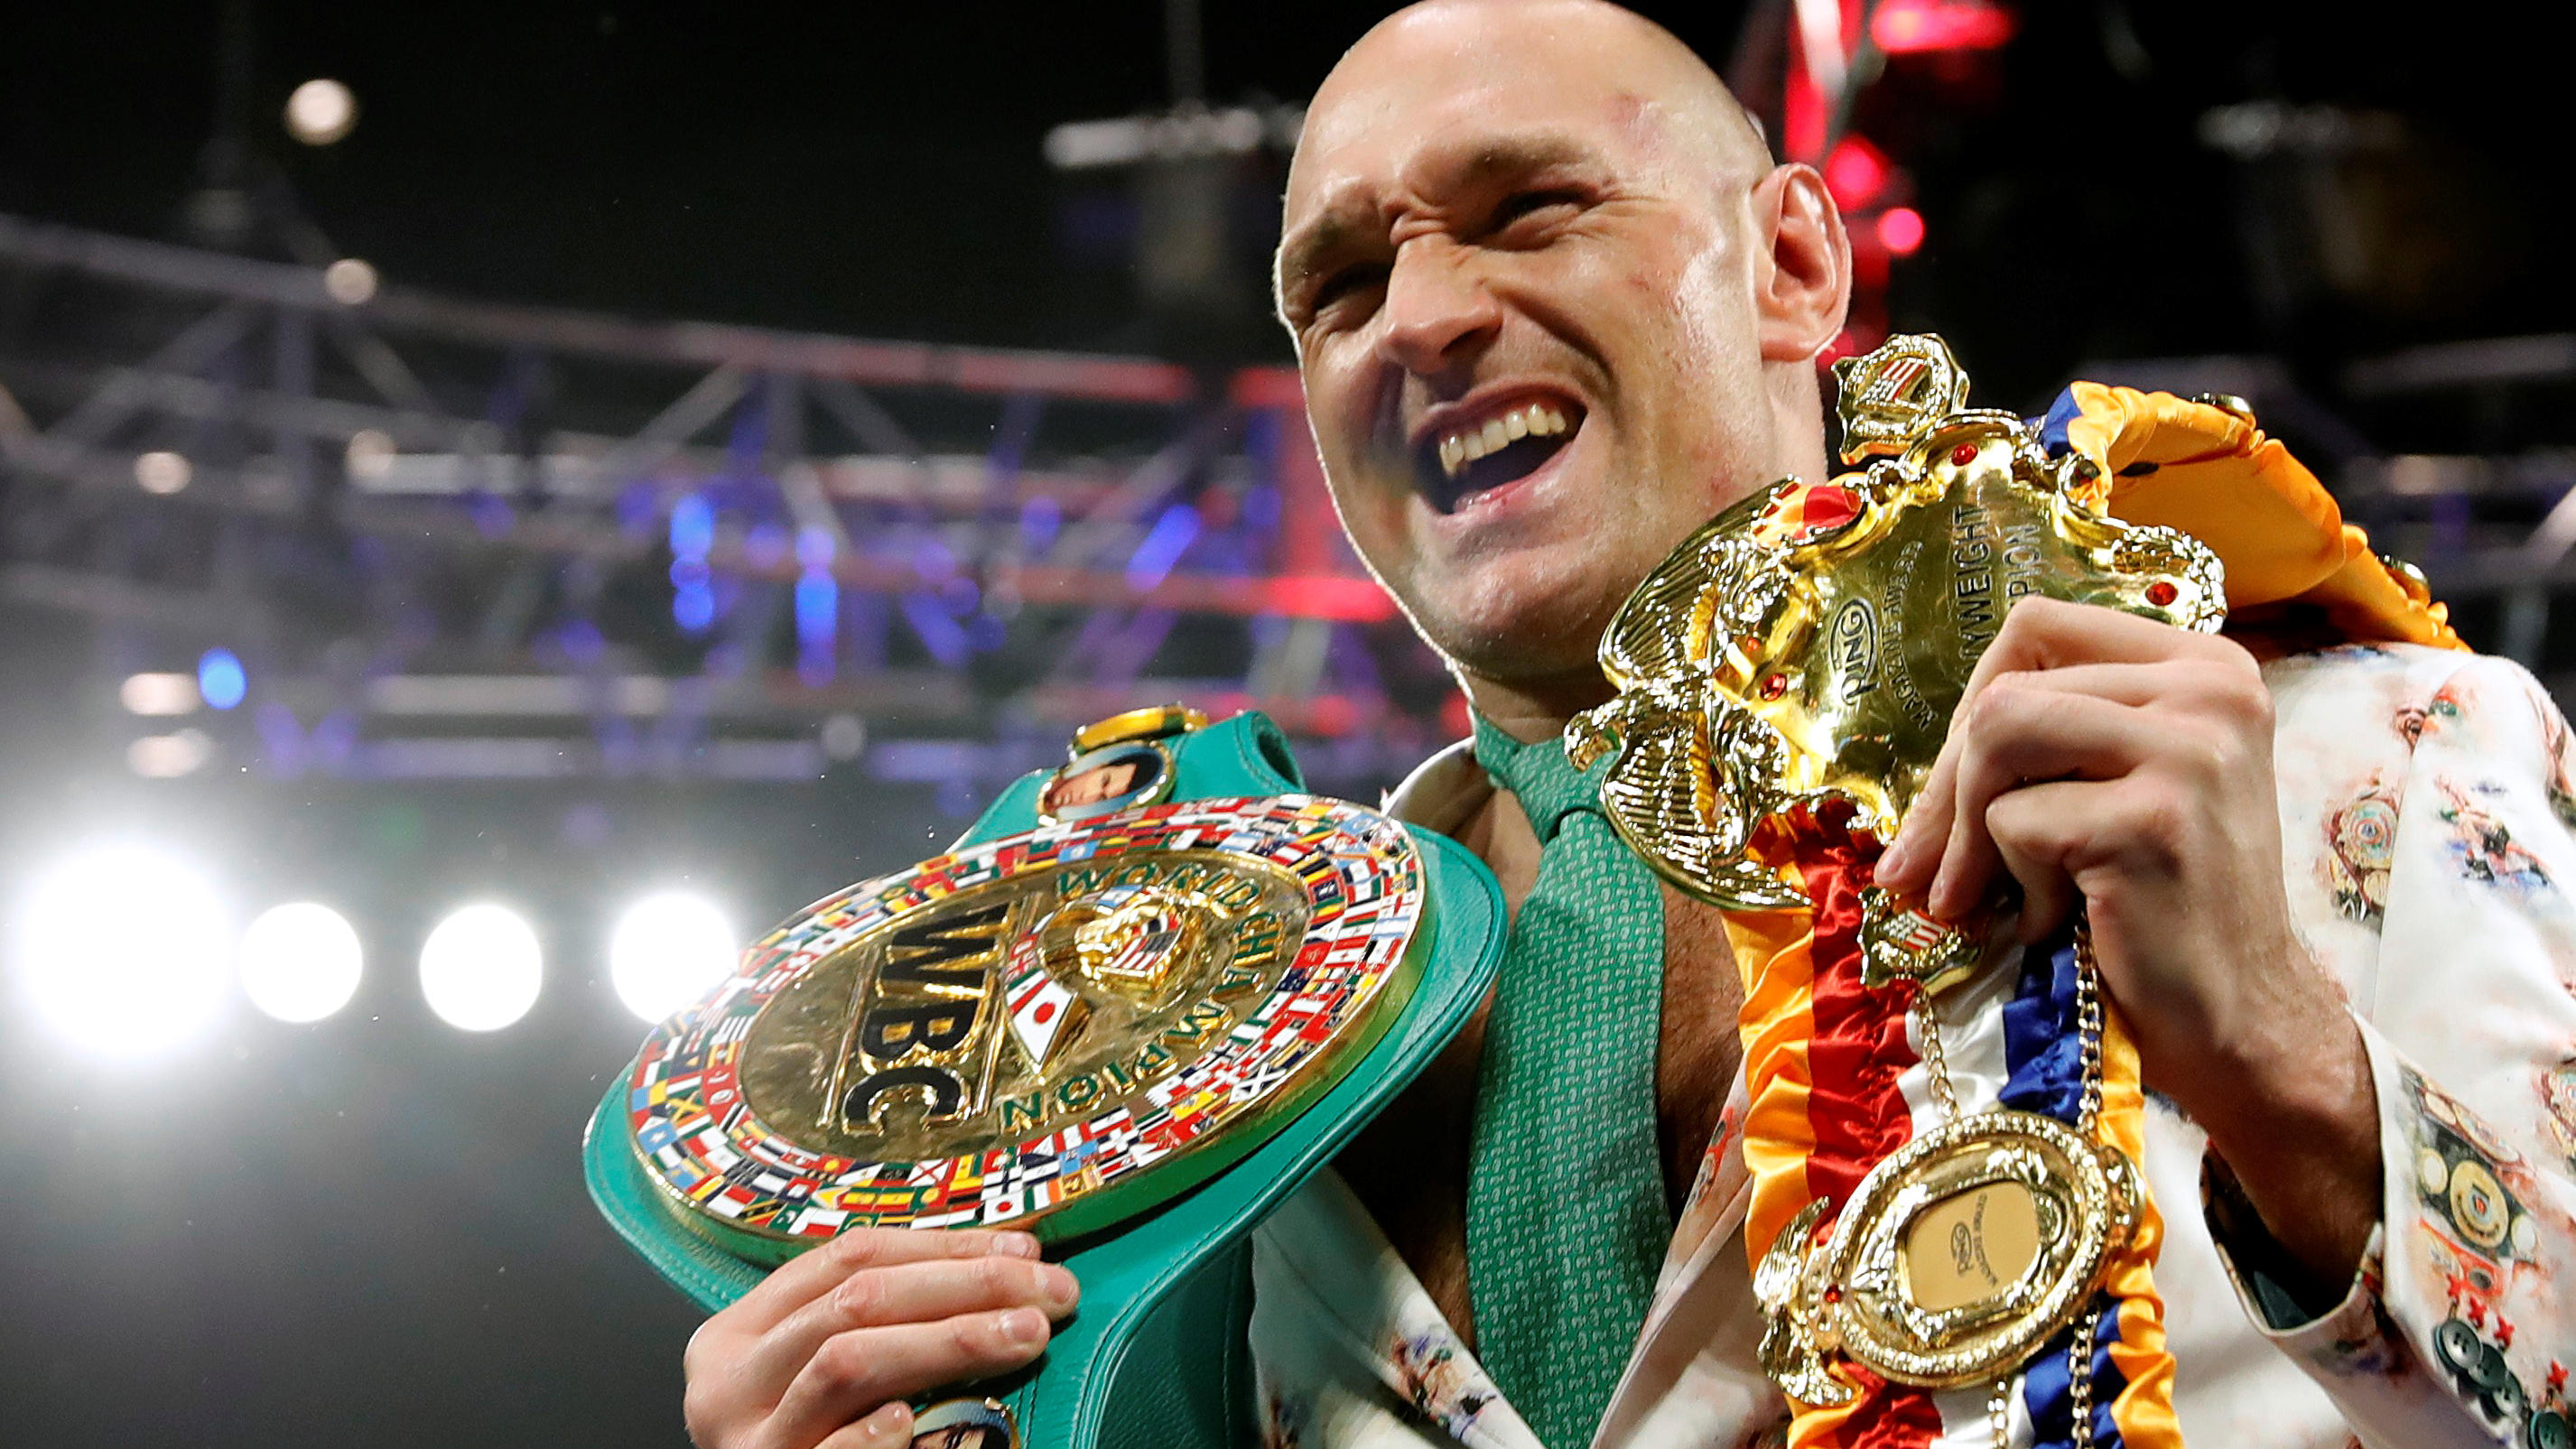 FILE PHOTO: Boxing - Deontay Wilder v Tyson Fury - WBC Heavyweight Title - The Grand Garden Arena at MGM Grand, Las Vegas, United States - February 22, 2020 Tyson Fury poses with his belts during a press conference after the fight REUTERS/Steve Marcu